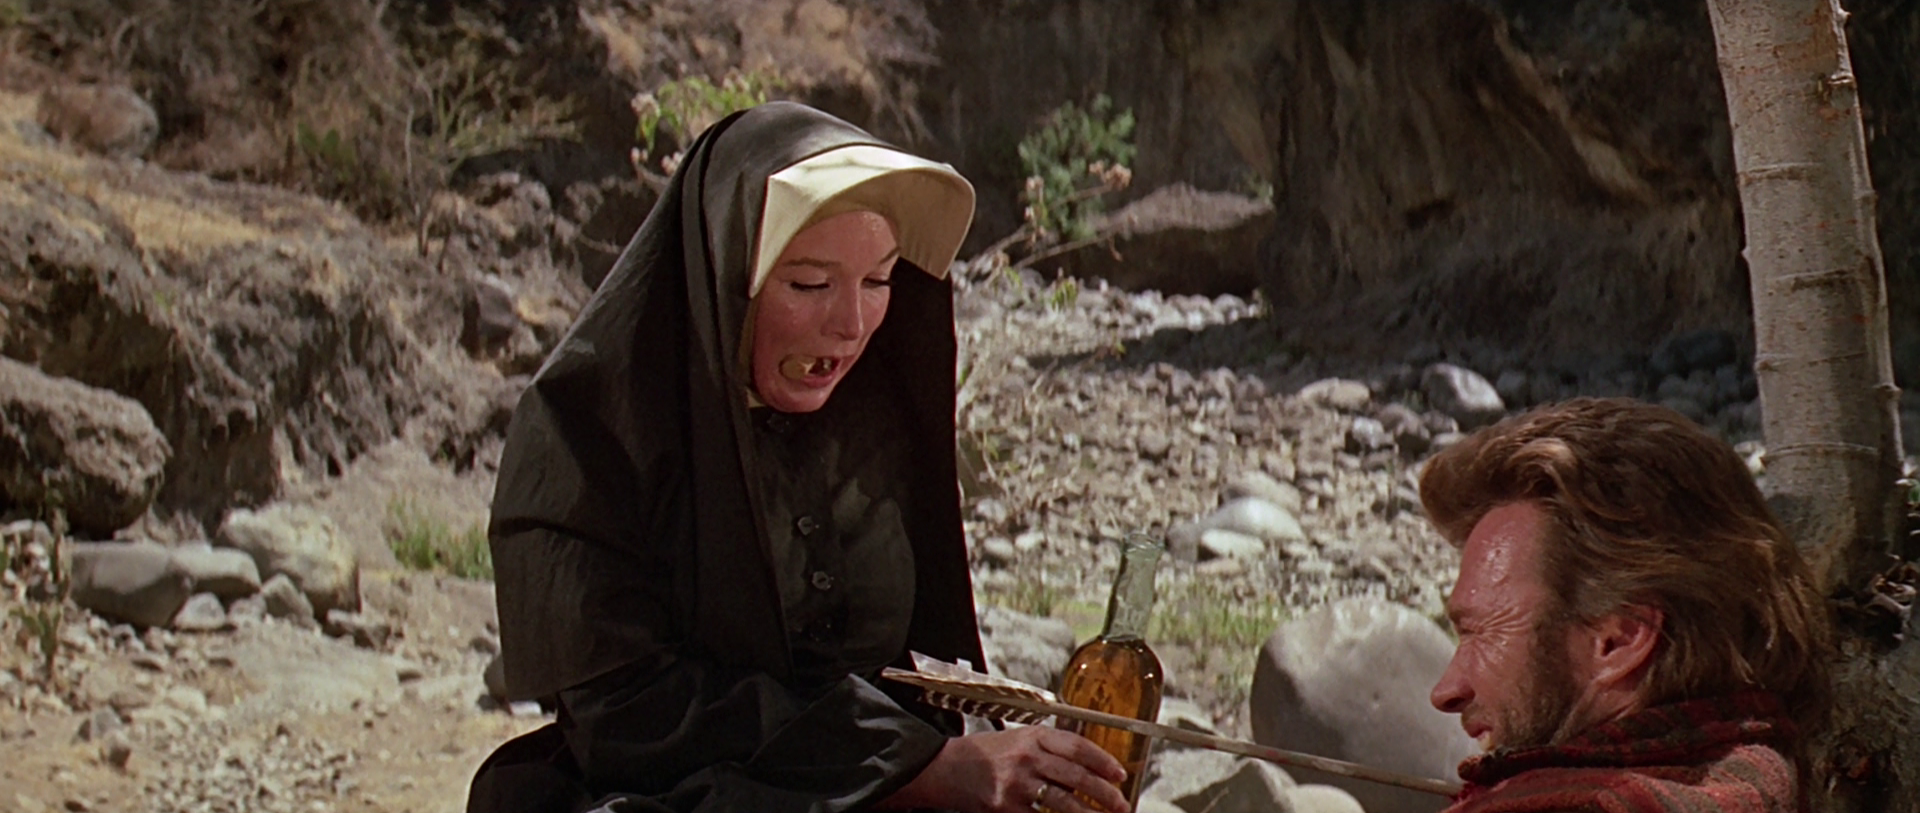 Sister Sara has a cork between her lips and hands a bottle of whiskey to Hogan, who has been wounded by an arrow.